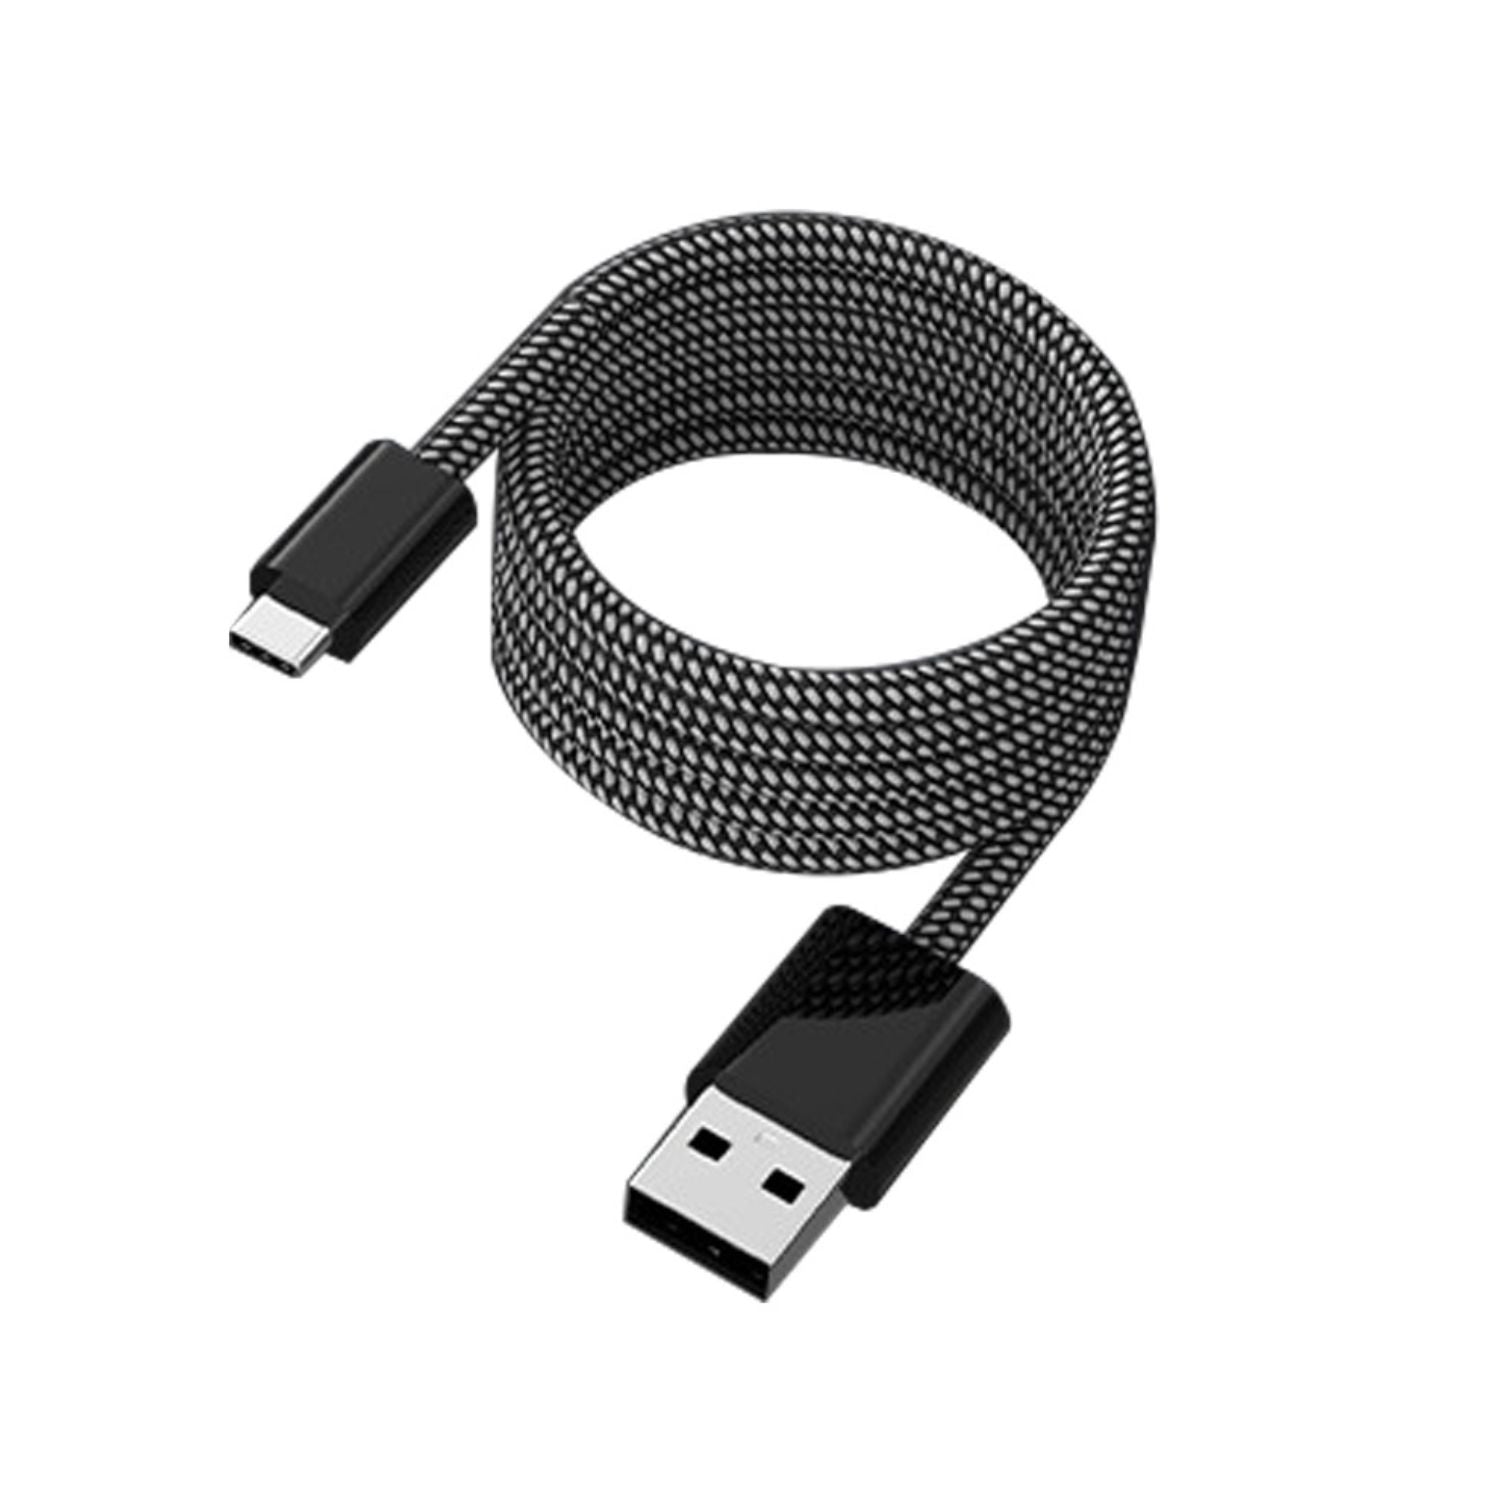 Magnetic Cable